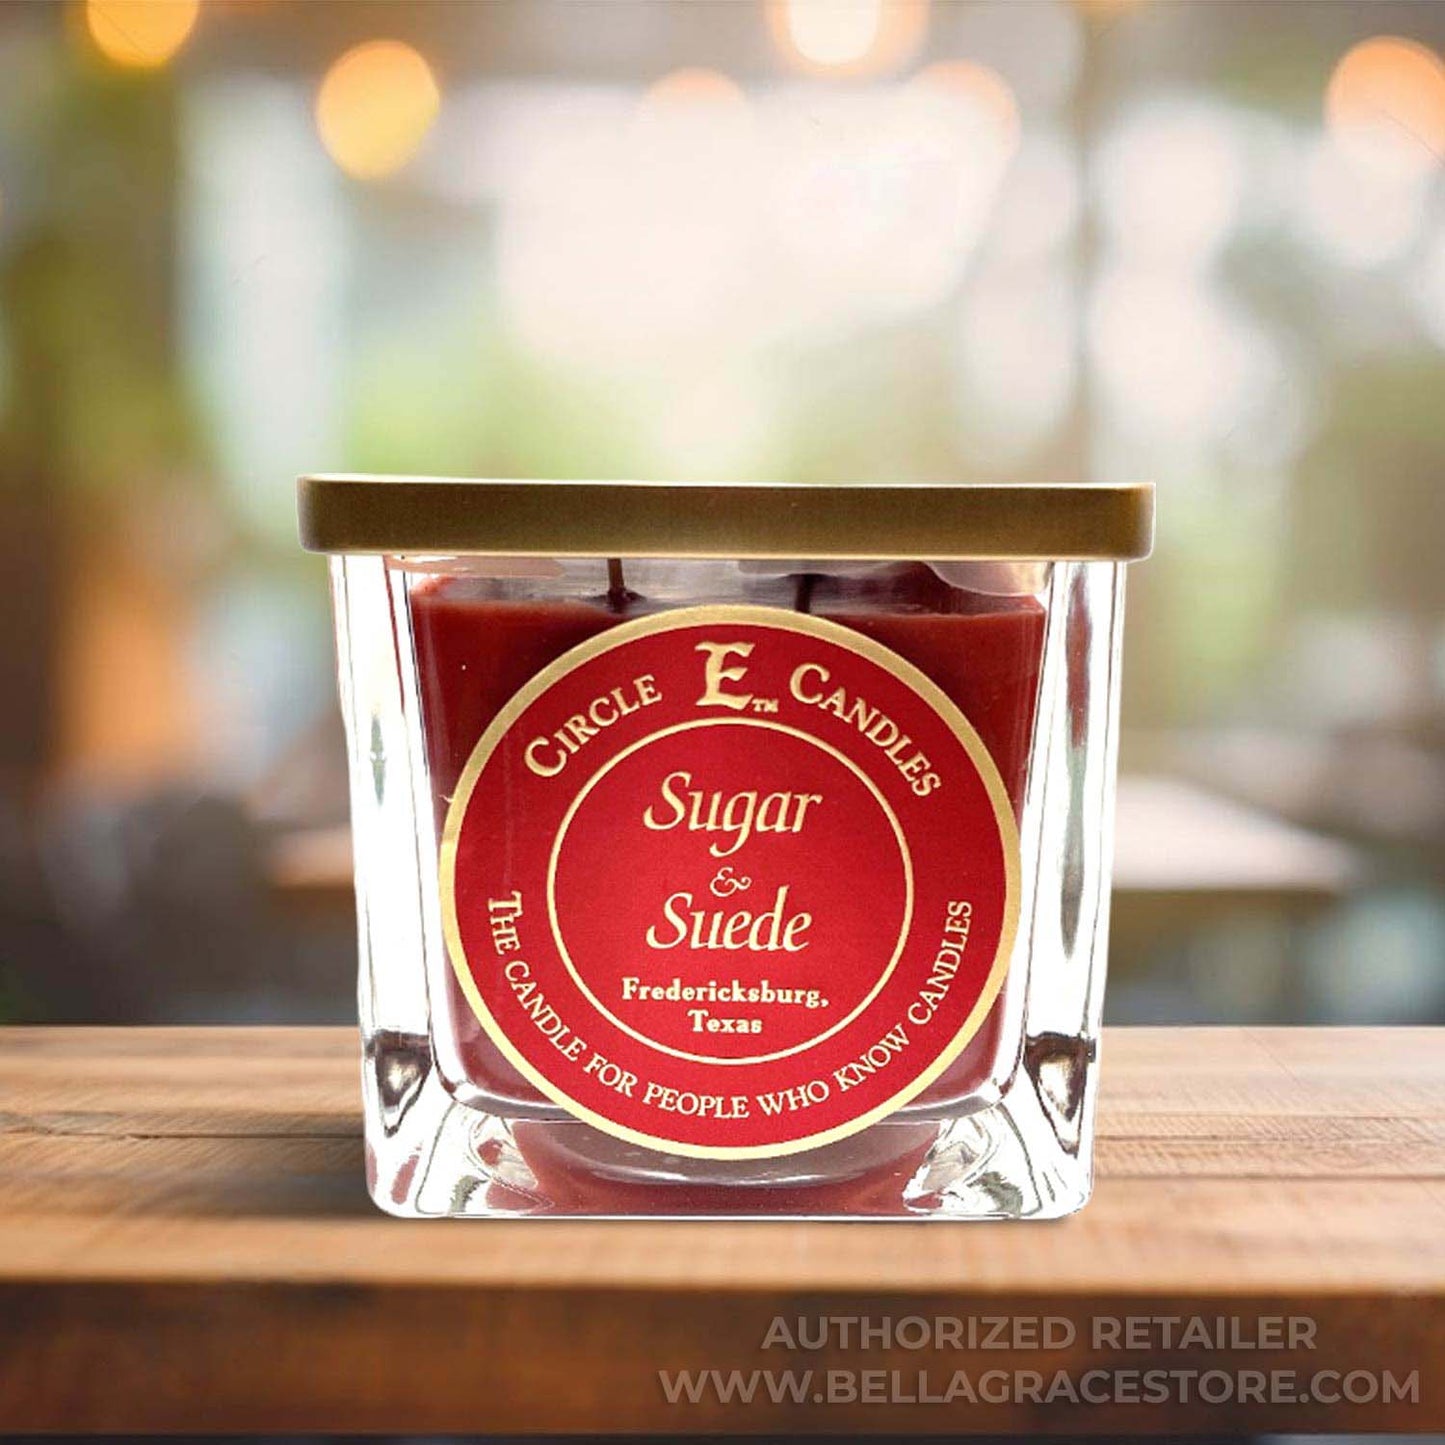 Circle E Candles, Sugar and Suede, Small Size Jar Candle, 8oz, 1 Wick